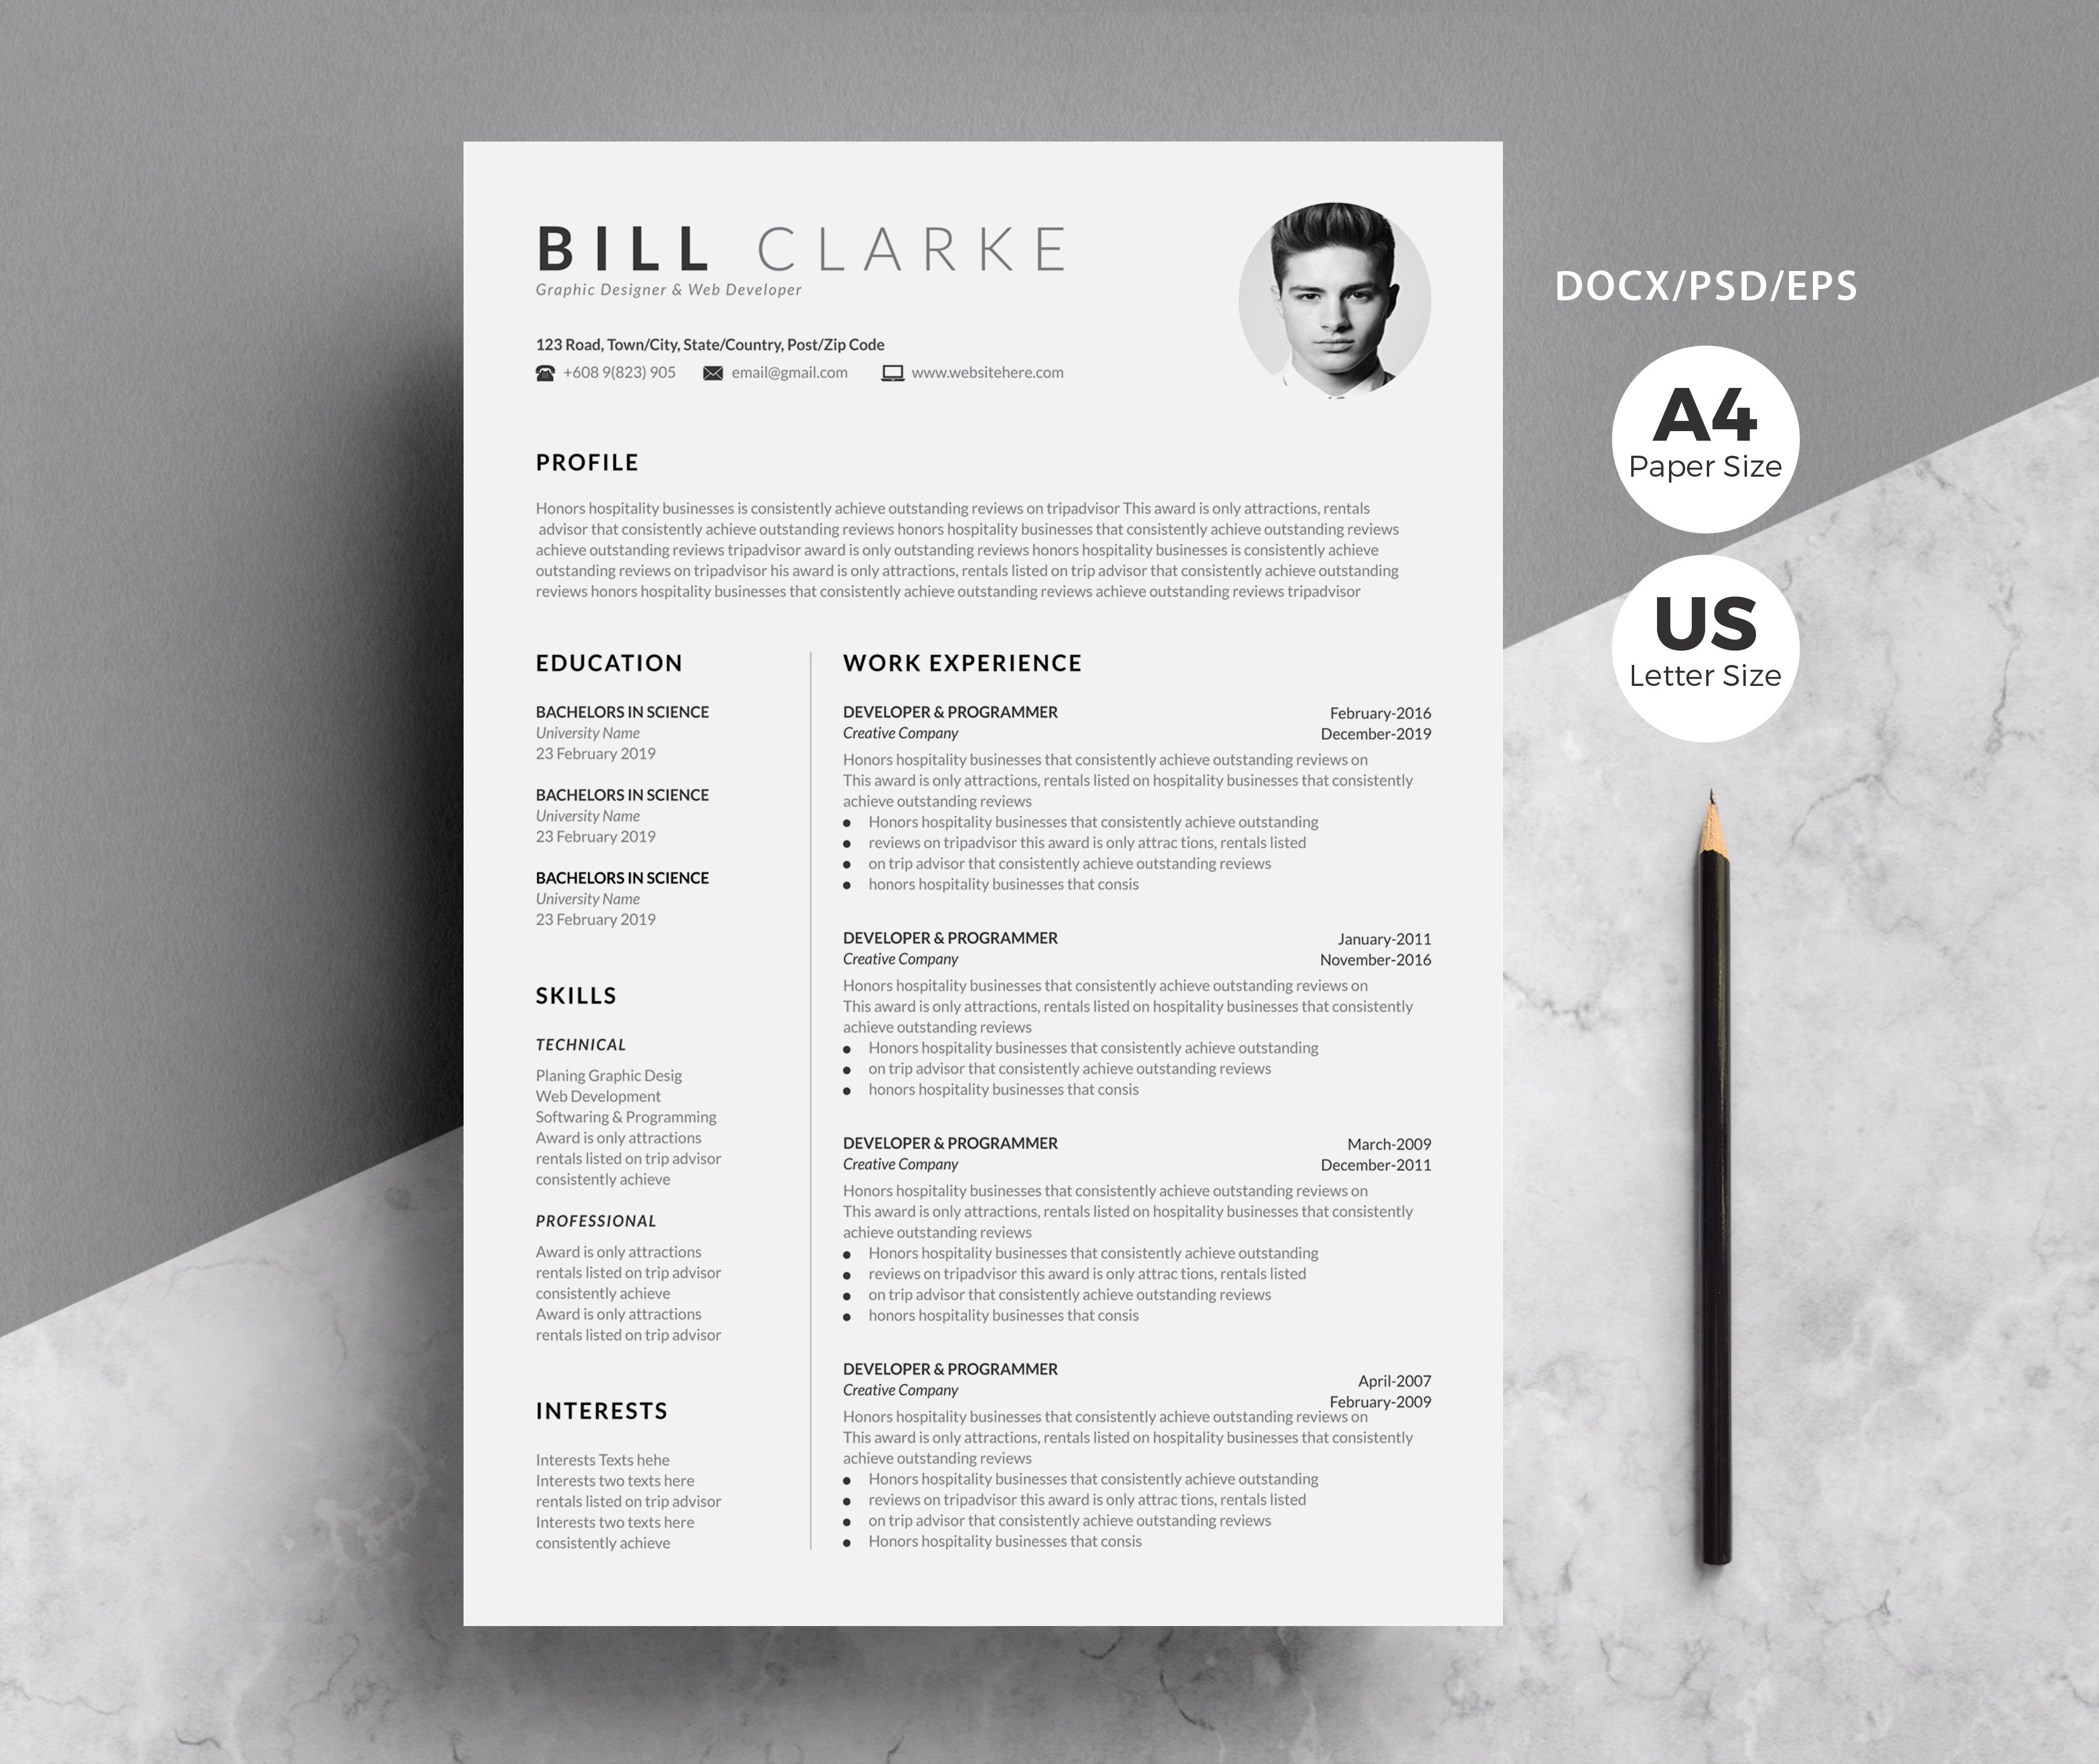 Word Resume & Cover Letter cover image.